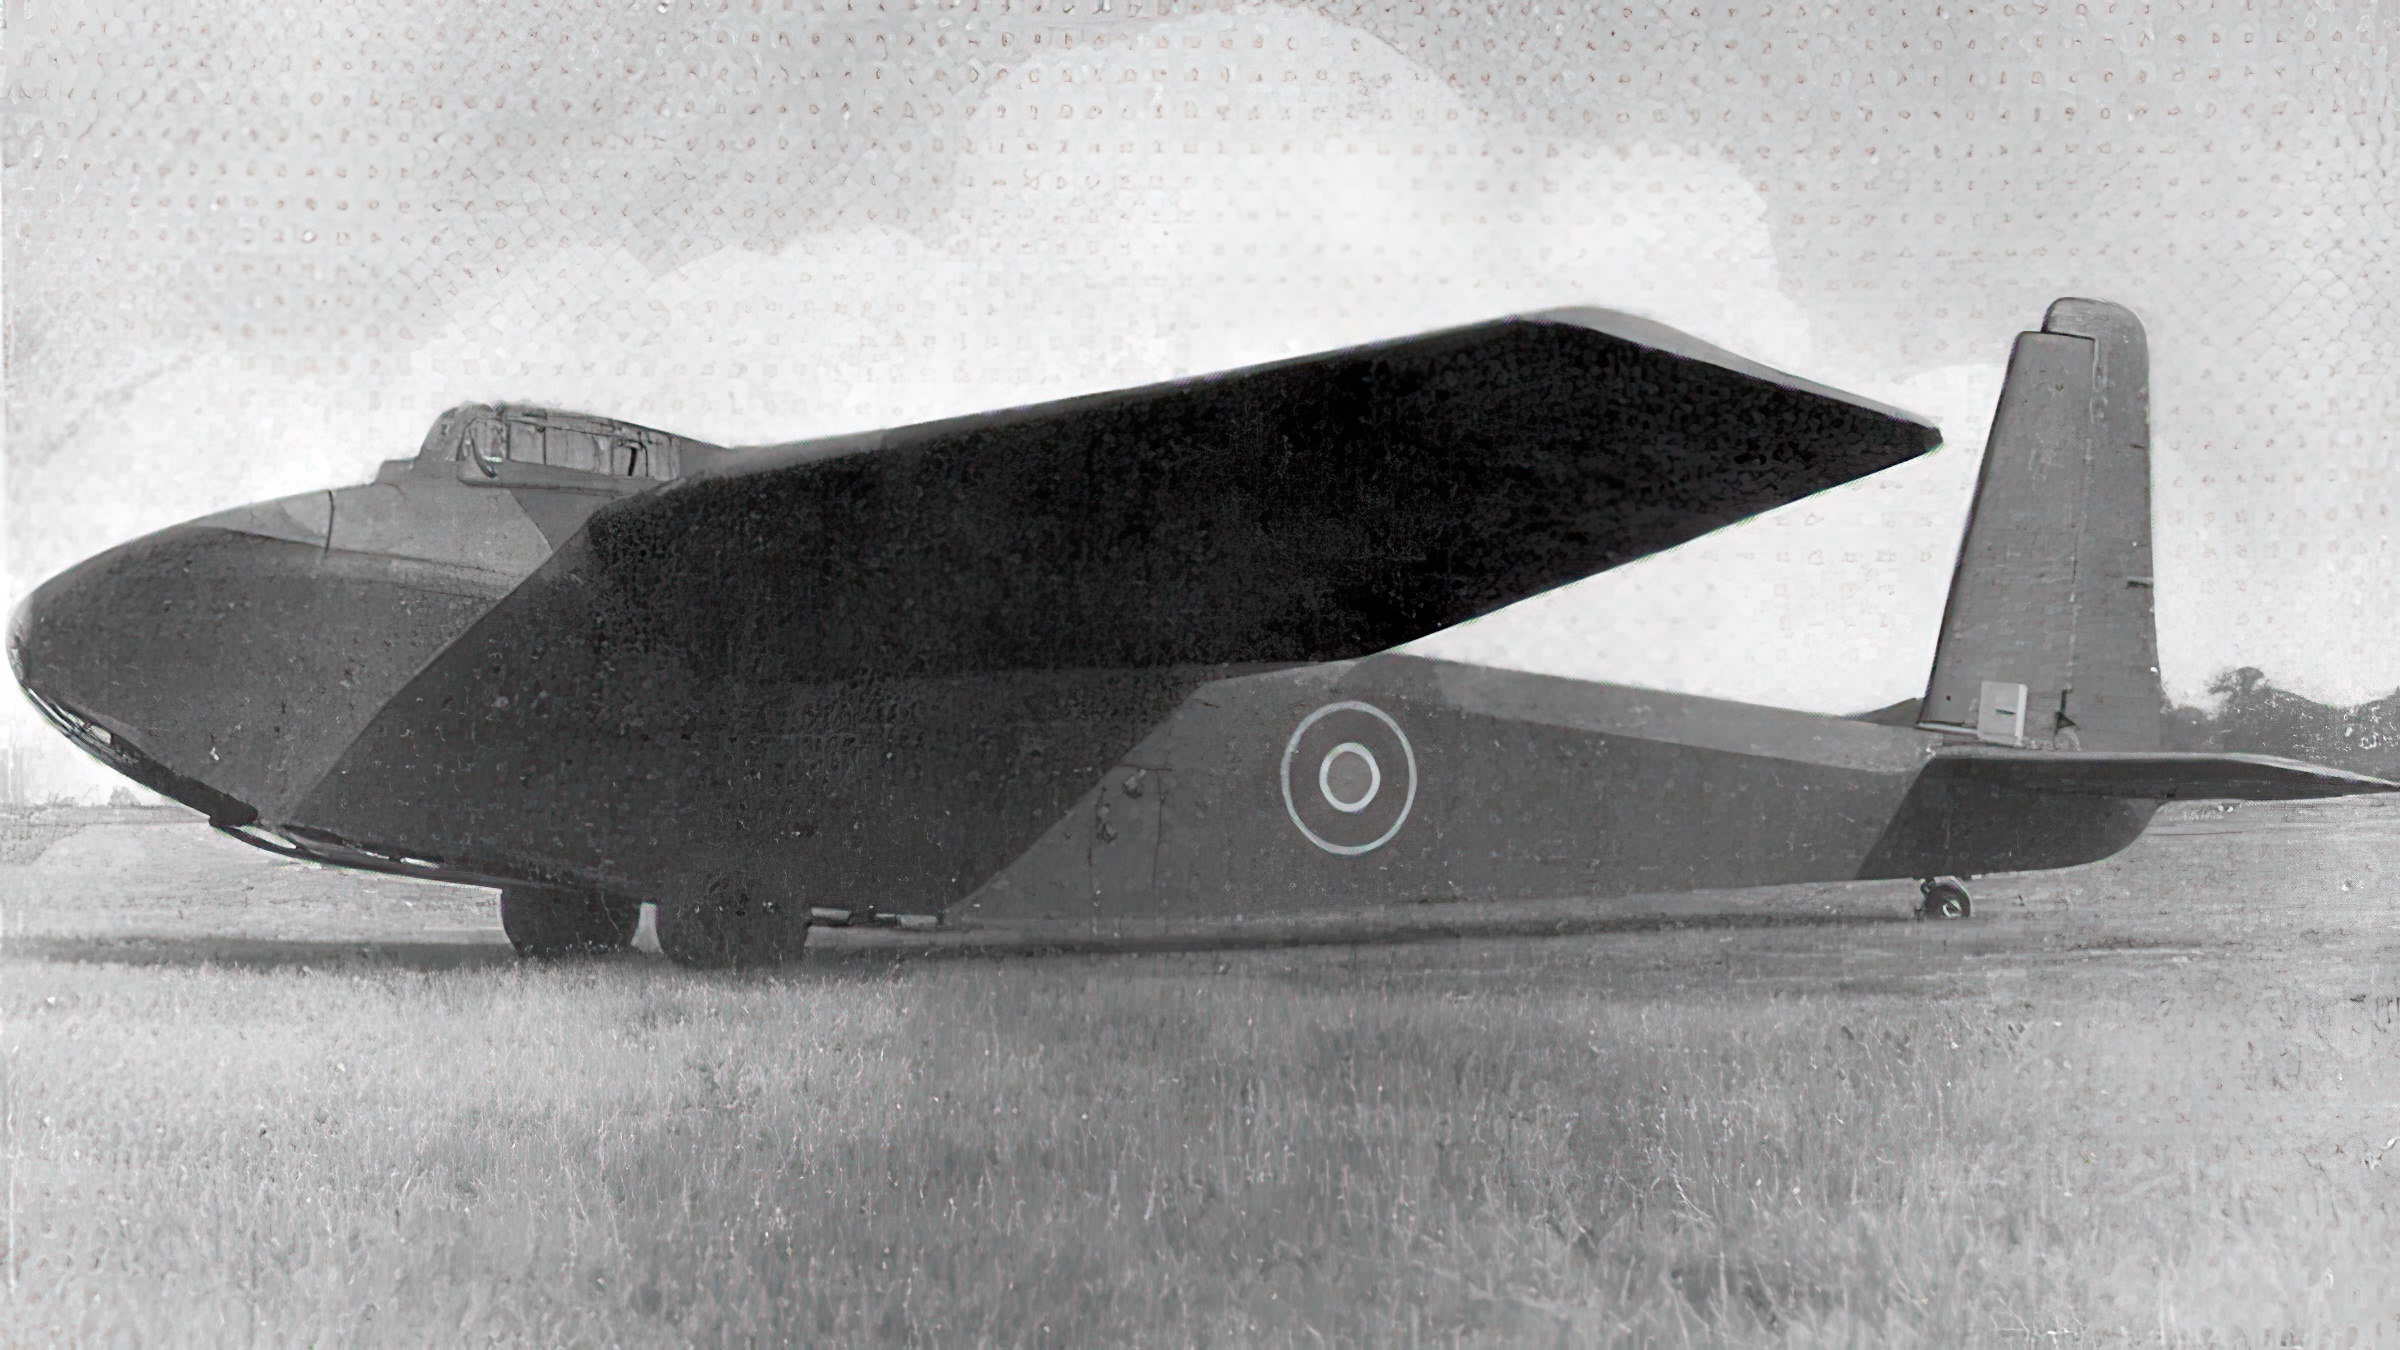 Side view of the imposing General Aircraft GAL49 Hamilcar, the largest Allied glider used in the Second World War